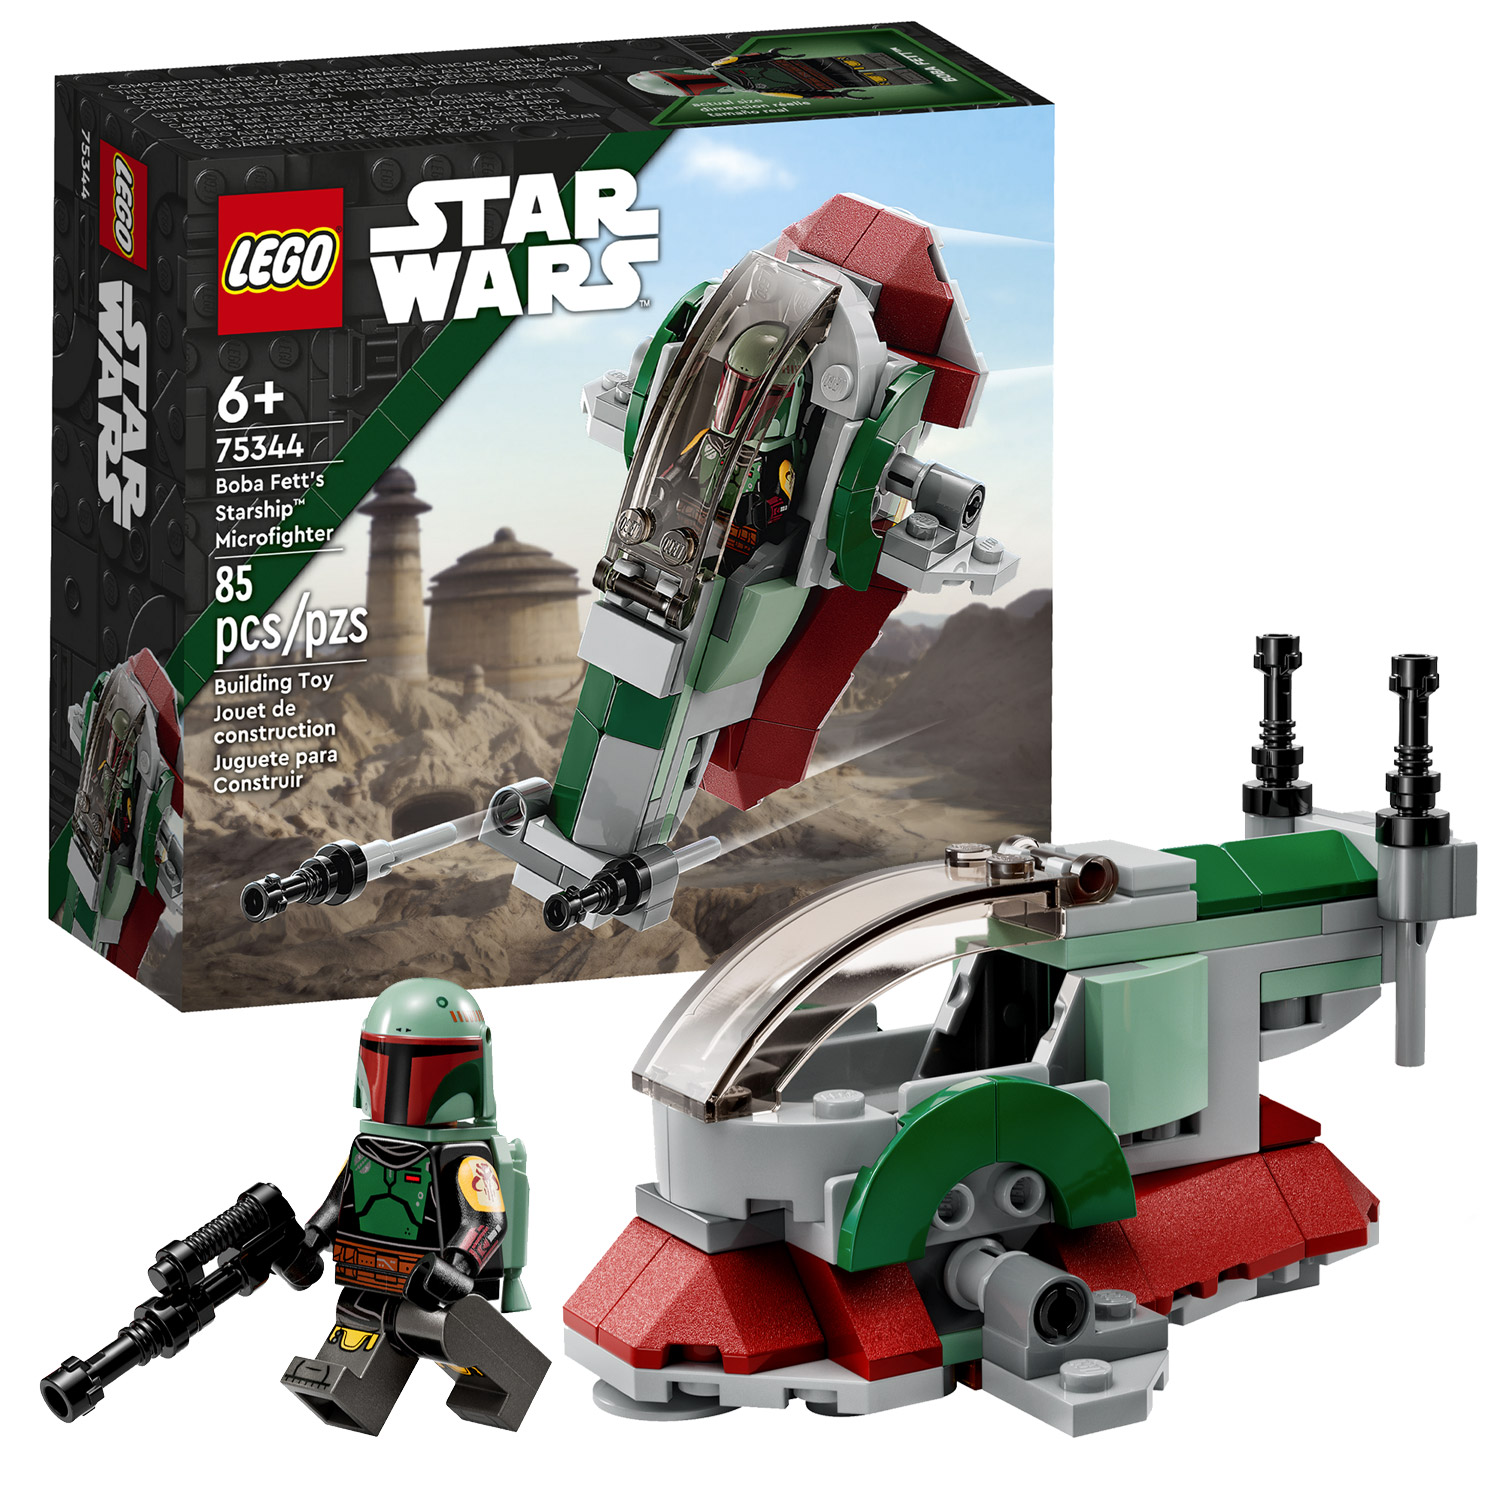 LEGO 75347 Star Wars TIE Bomb Model Kit with Darth Vader Mini Figure with  Lightsaber and Gonk Droid & 75344 Star Wars Boba Fetts Starship -  Microfighter Set, Model from The Mandalorian